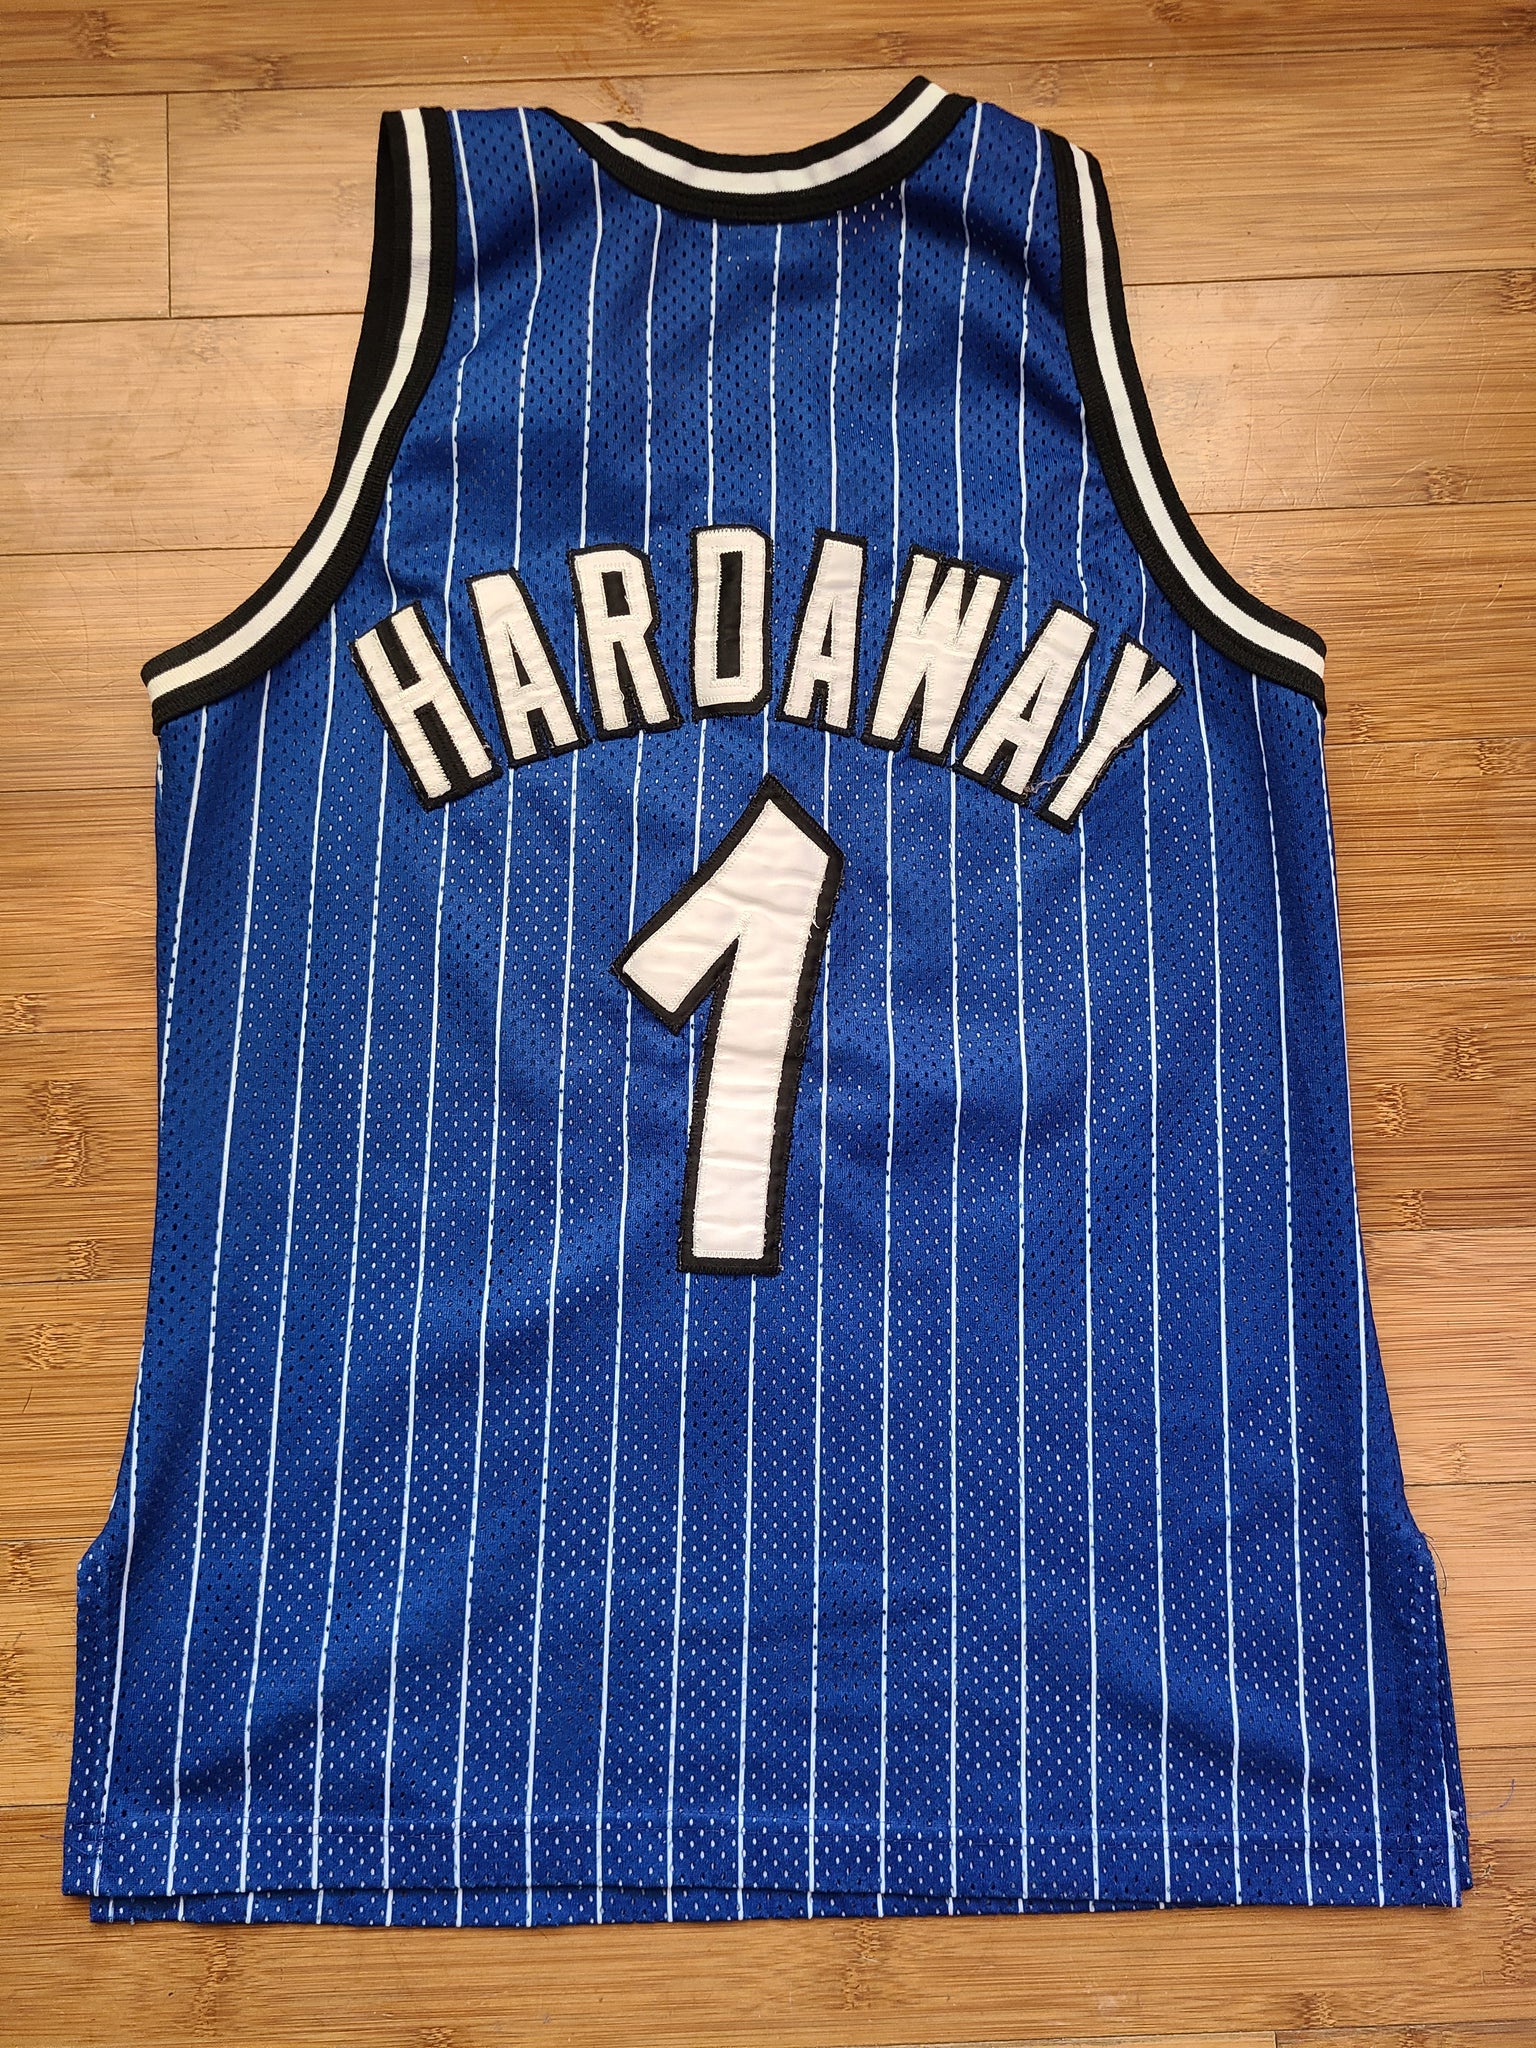 penny hardaway authentic jersey